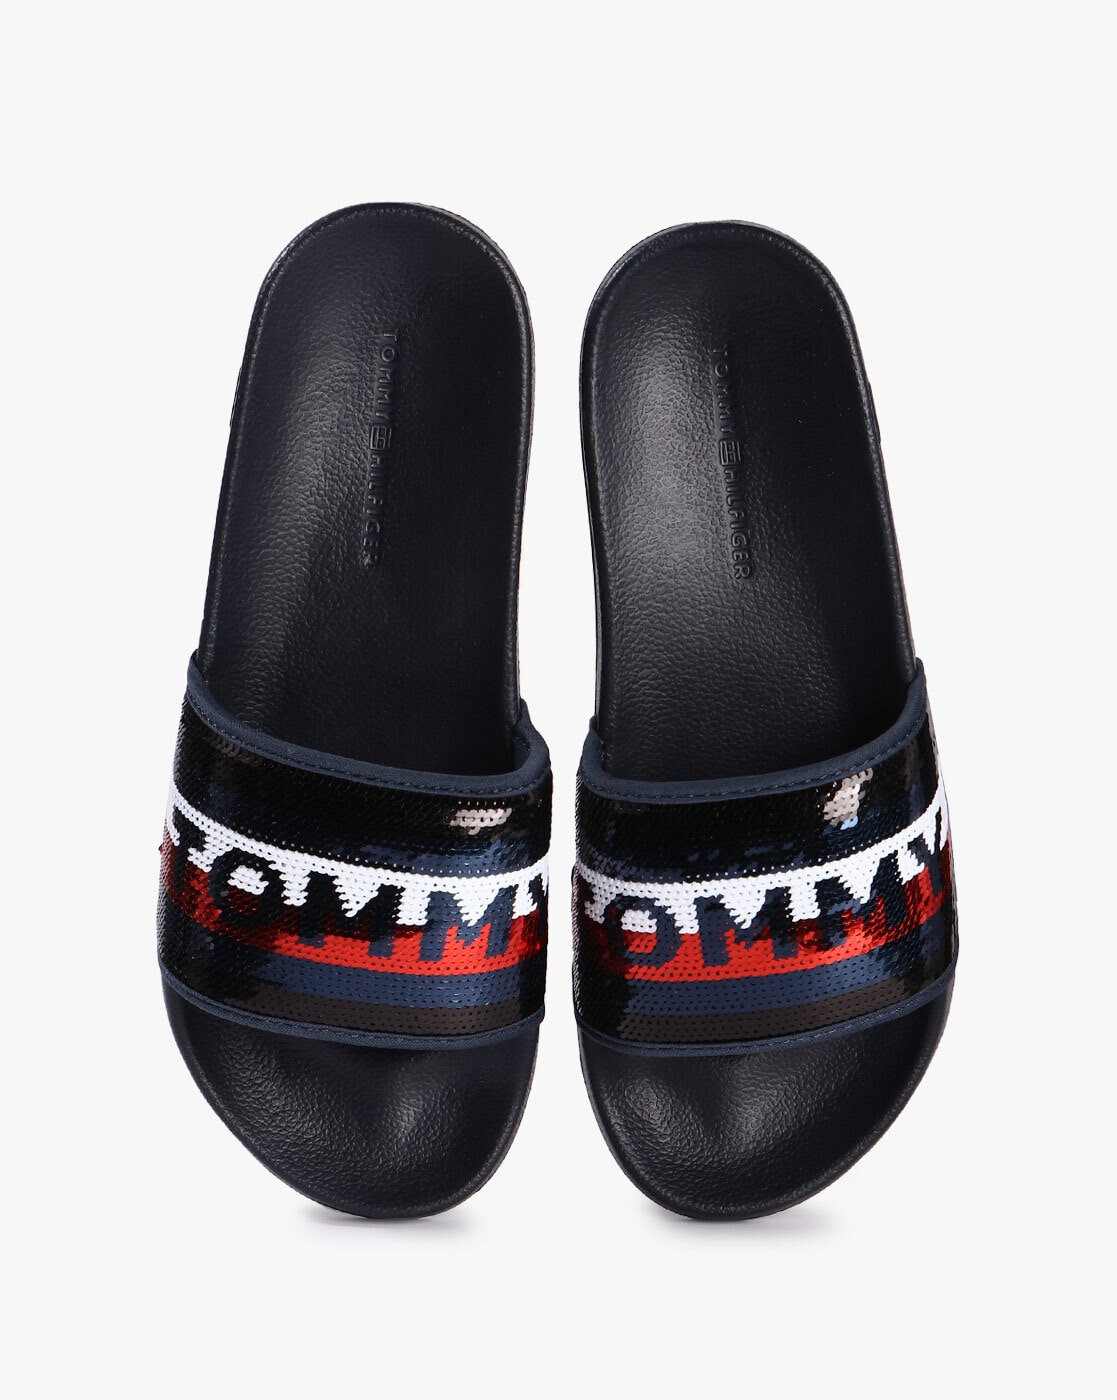 womens tommy sliders